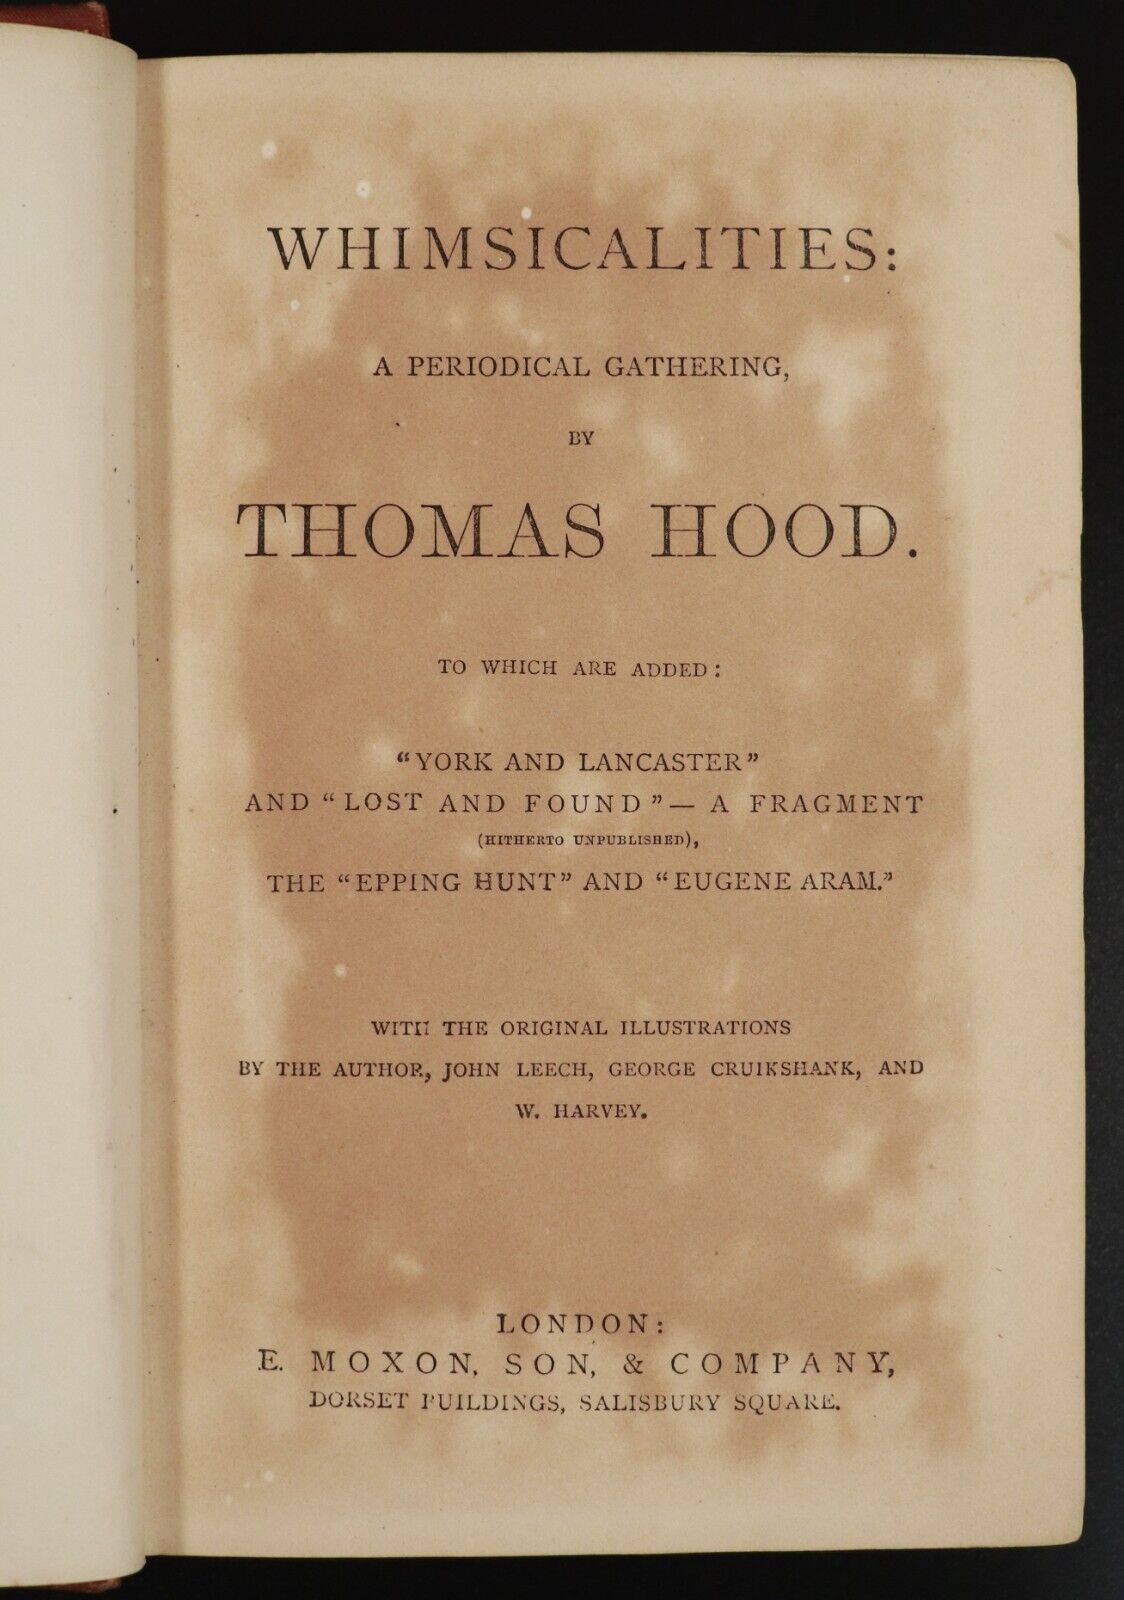 c1880 Whimsicalities by Thomas Hood Antique Illustrated British Literature Book - 0